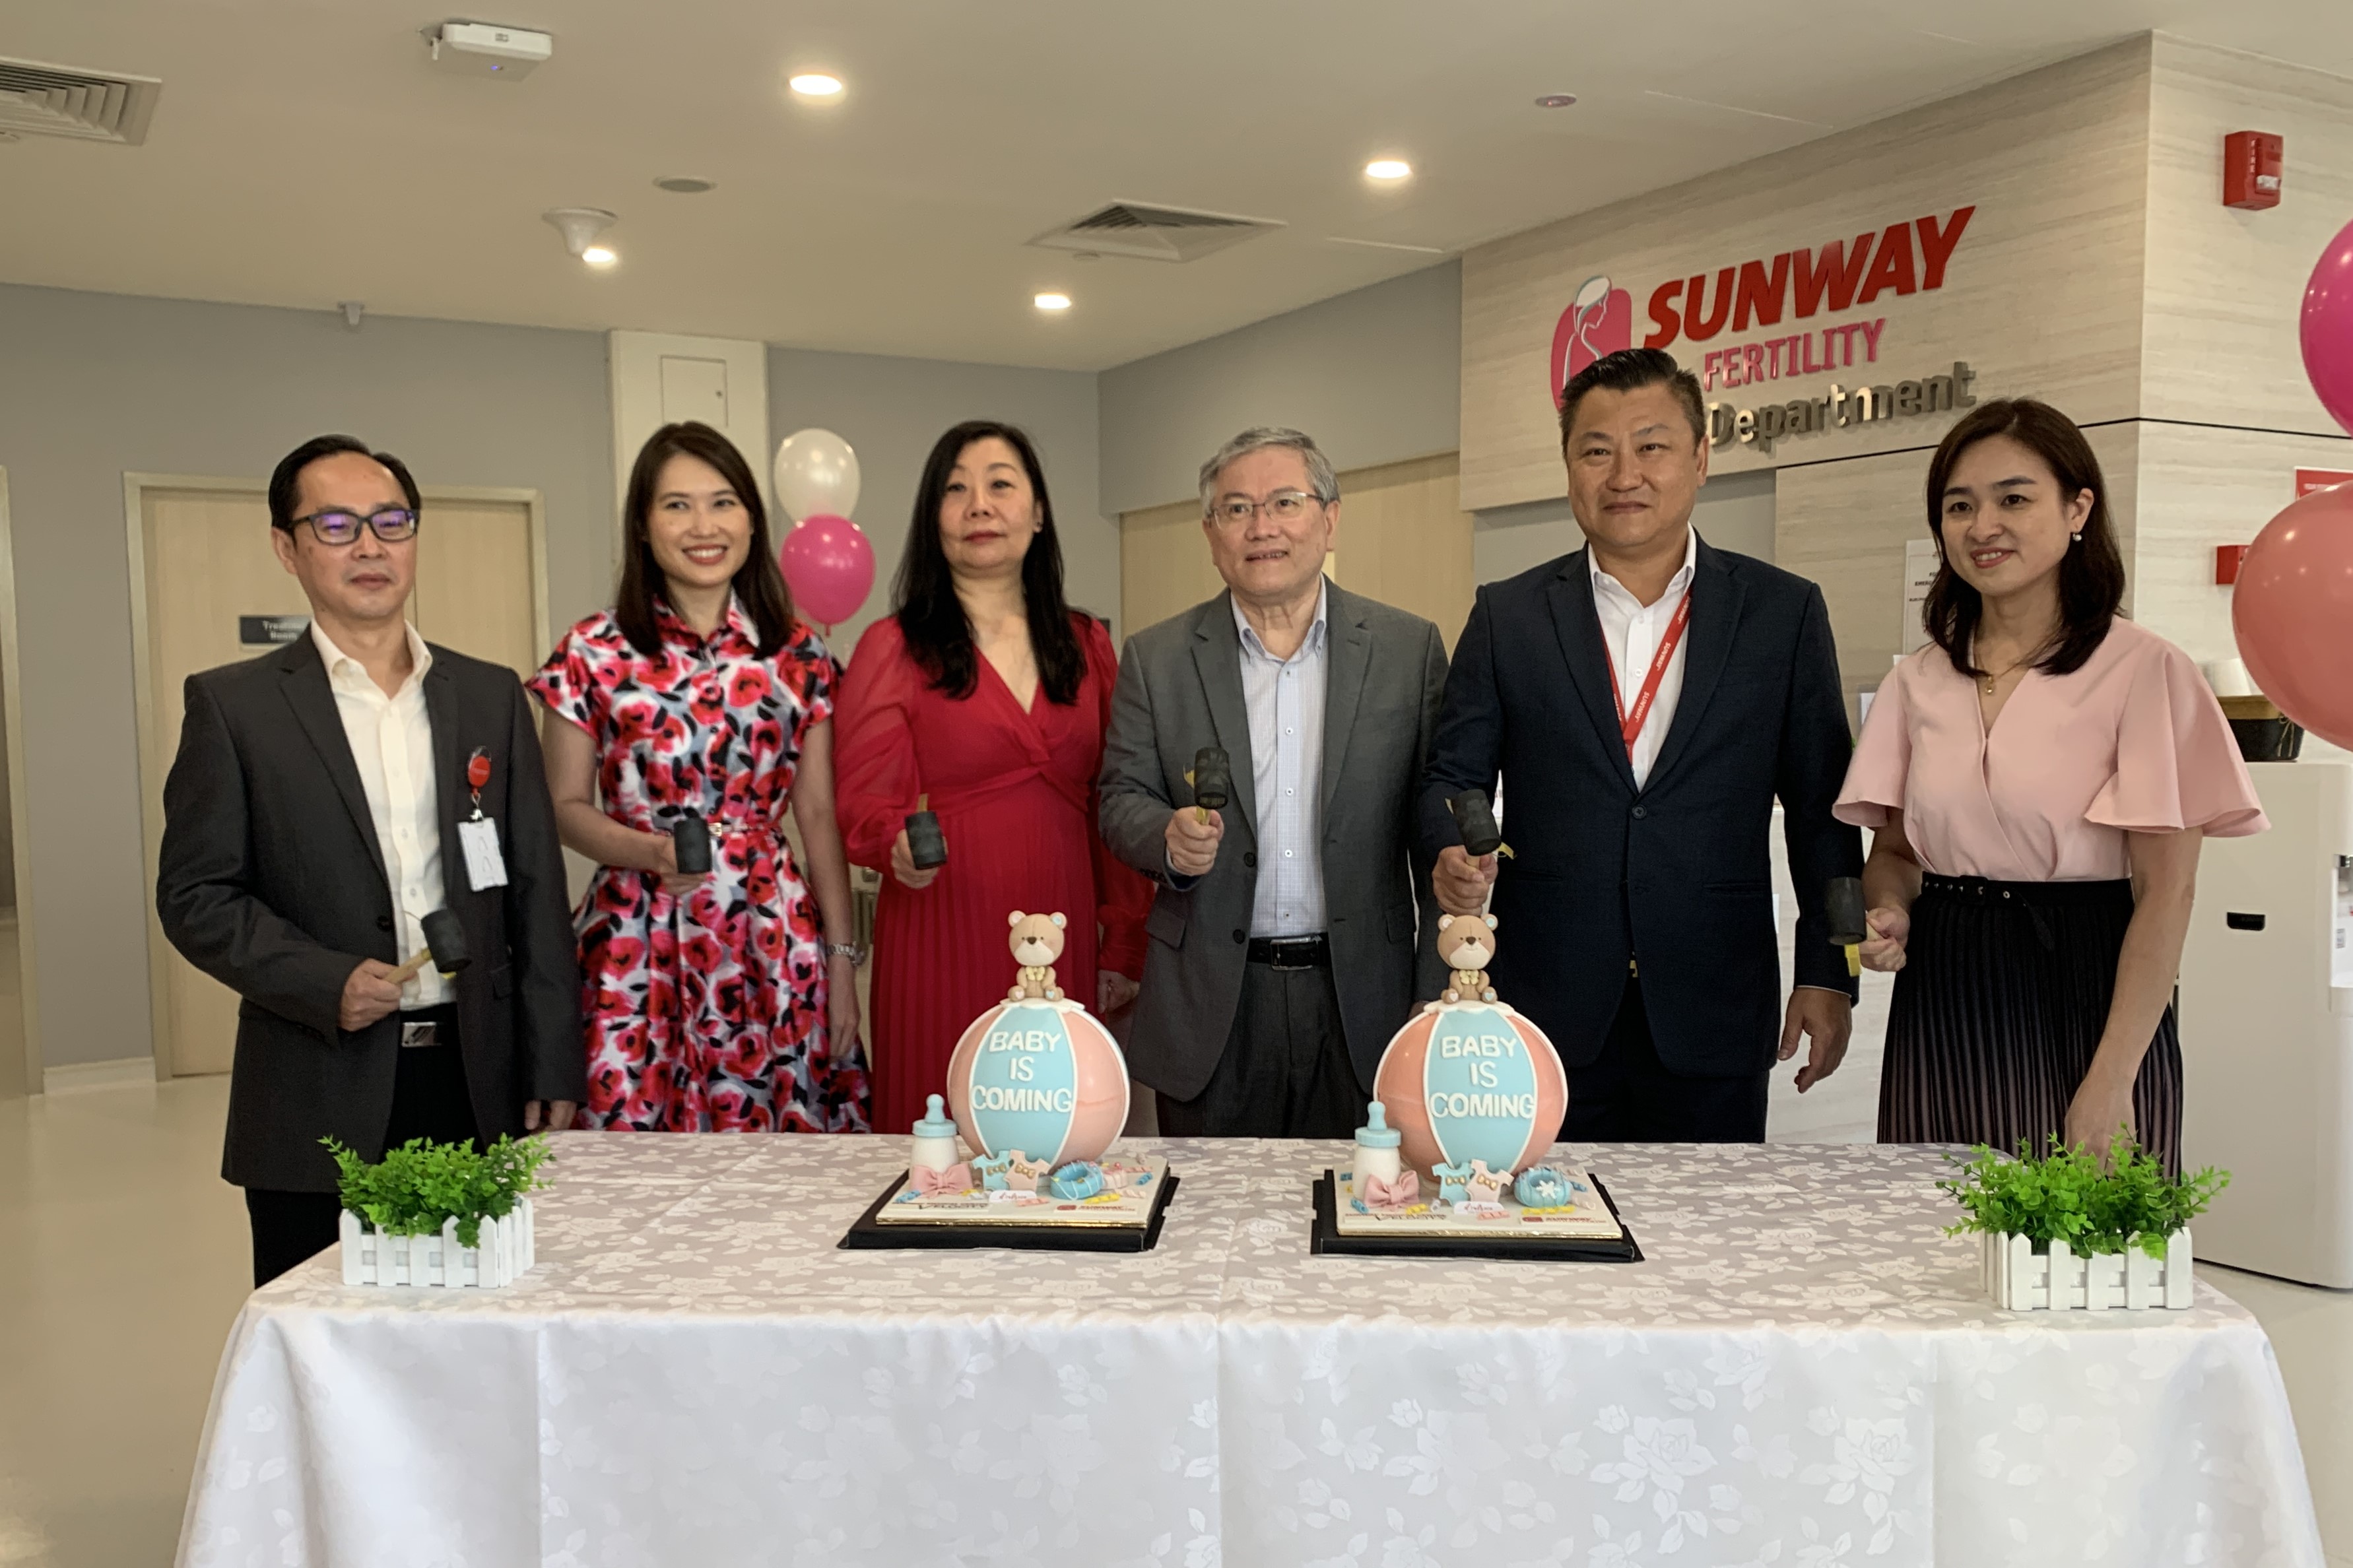 Sunway Medical Centre Velocity launches new fertility centre